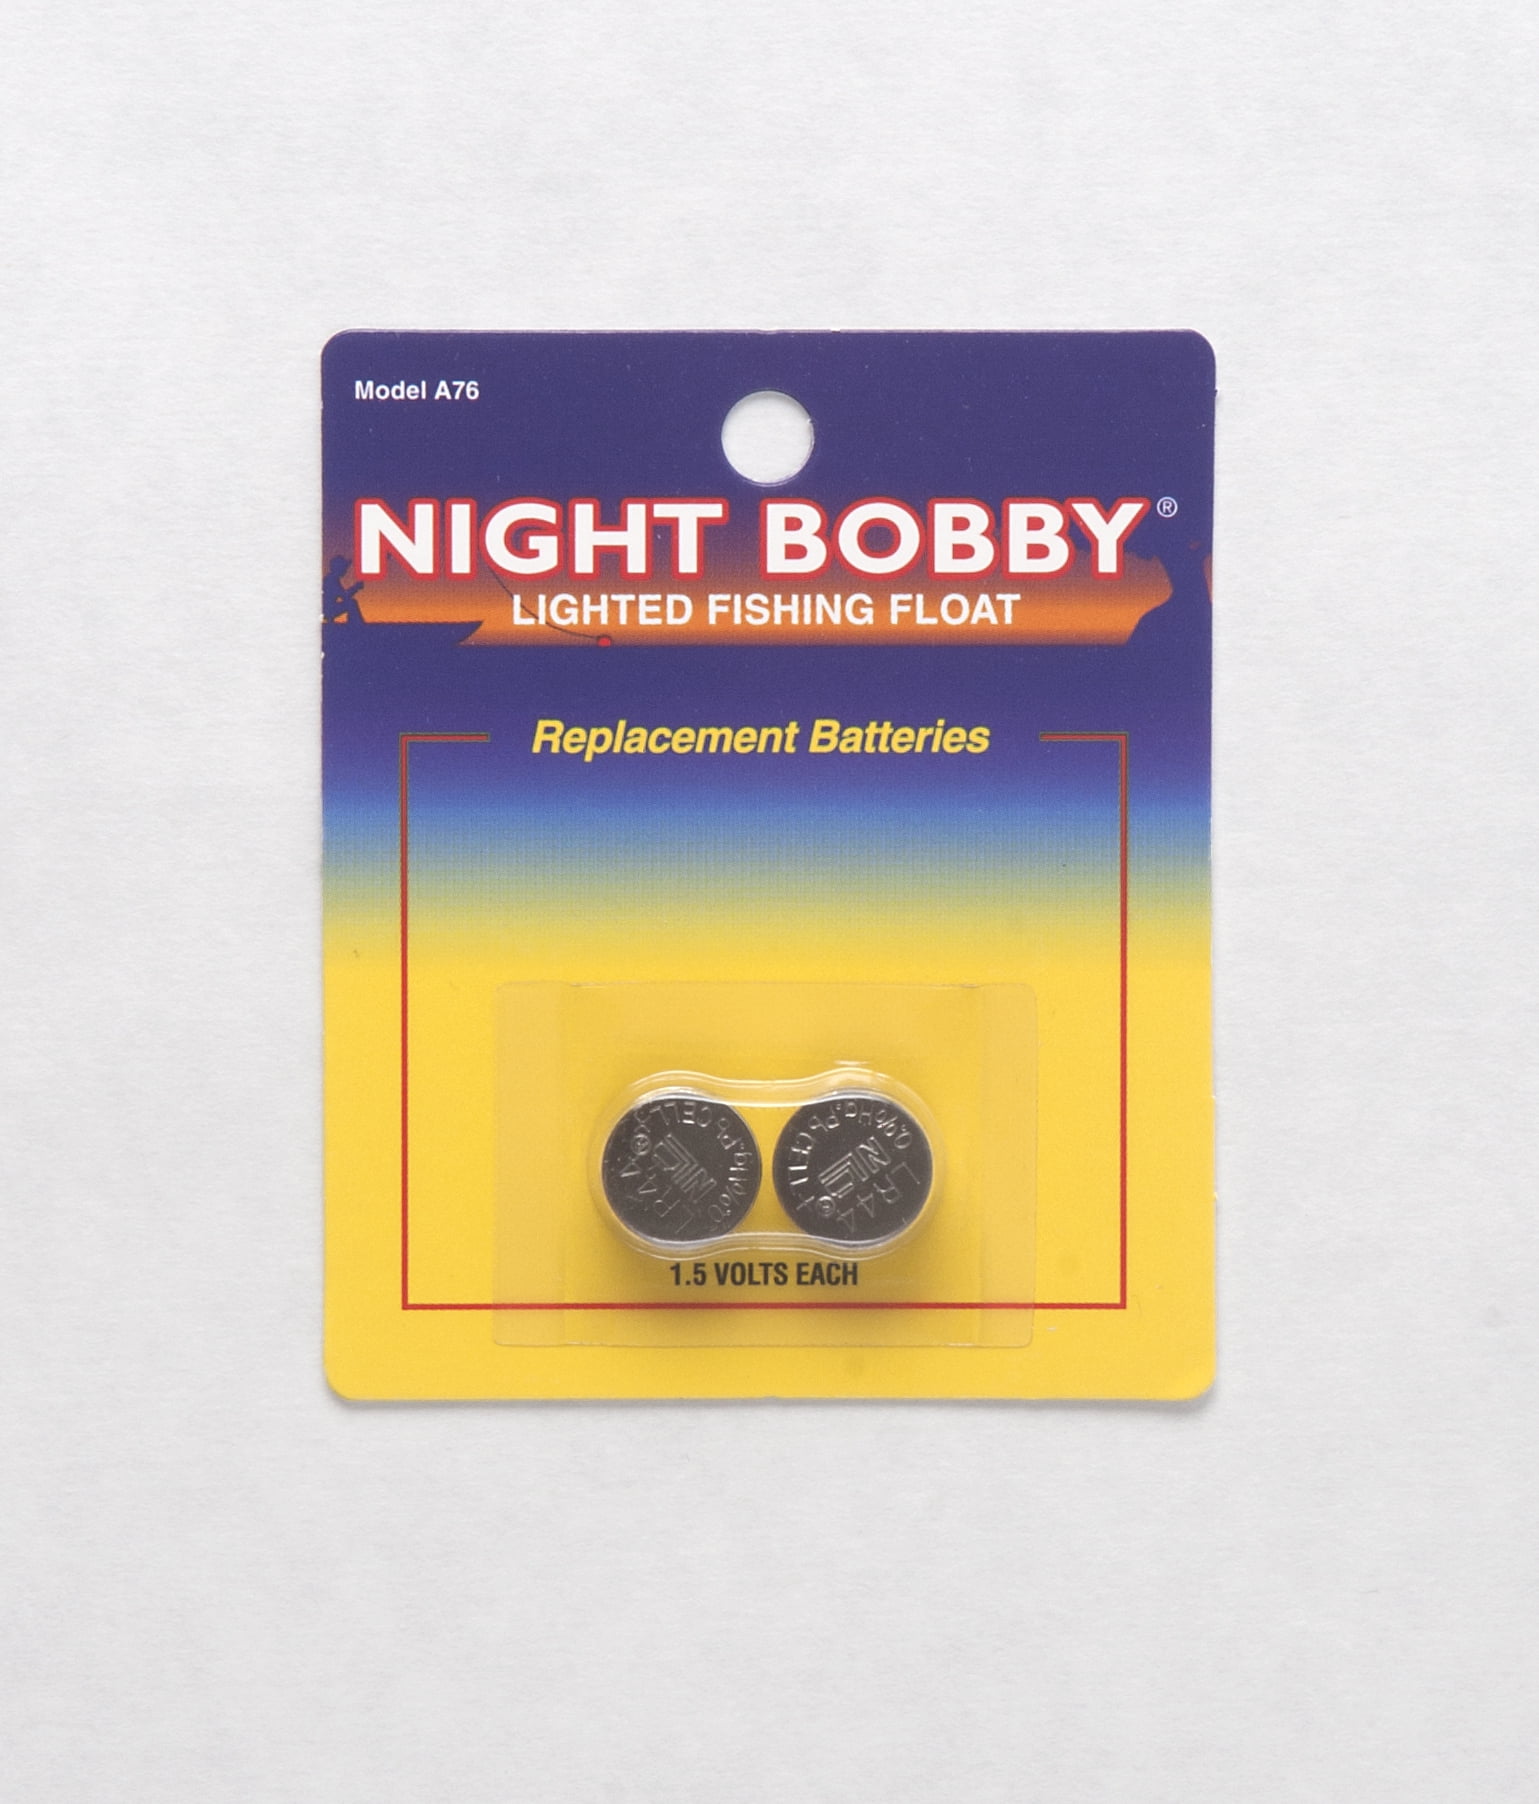 Night Bobby Lighted Fishing Float Replacement Batteries 1.5 Volts, Model  A76